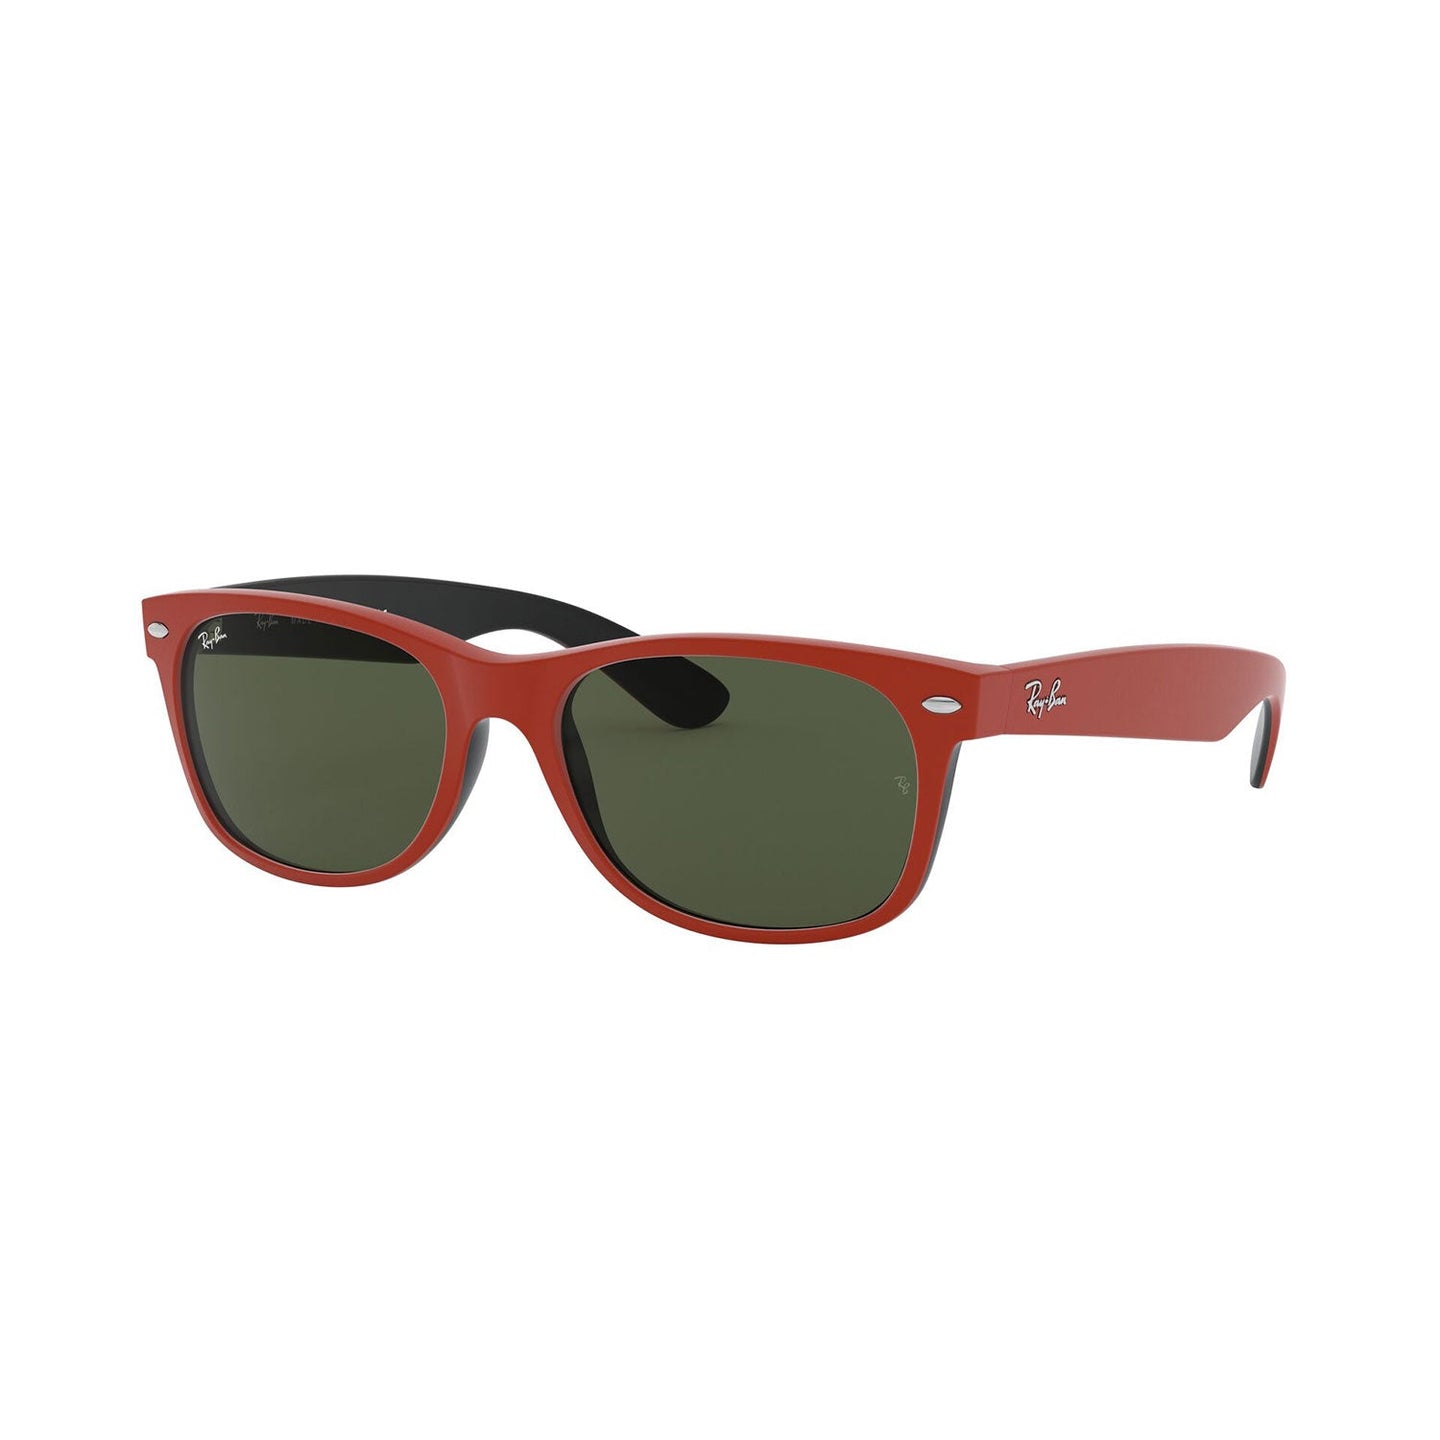 sunglasses ray ban model rb 2132 color 6466/31 red